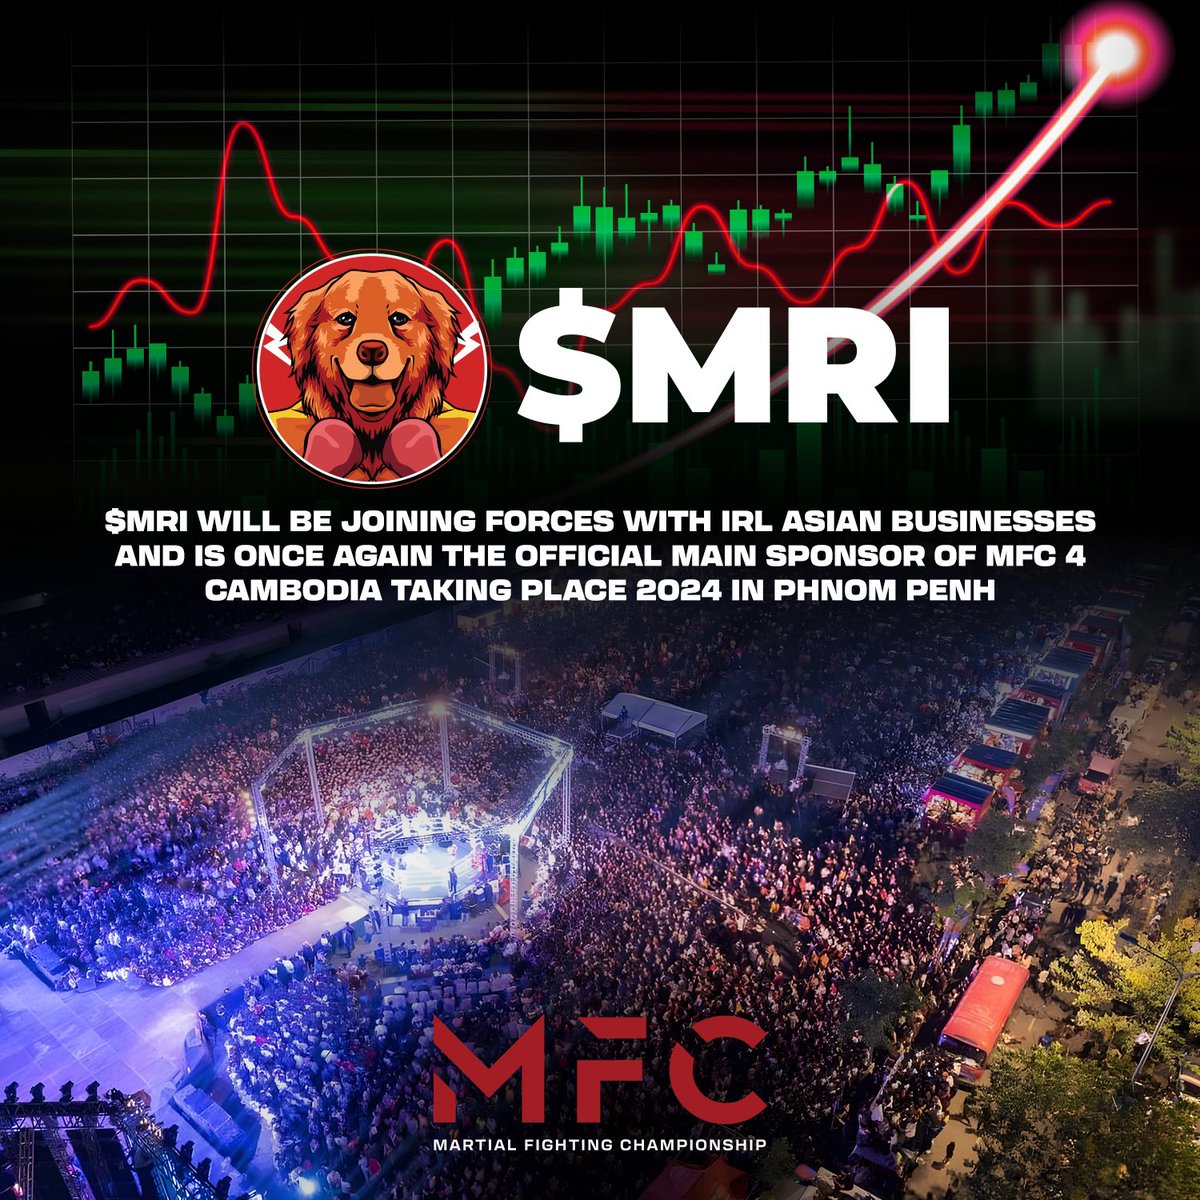 🚀 Unleashing pure power! 💥 $MRI stands tall as the driving force behind @WorldwideMFC’s new era! 

Staying true to our #fightingforfighters mission, we are thrilled to be the main sponsor! Brace yourselves for an electrifying sponsorship on a NEW continent 🌍– the stage just